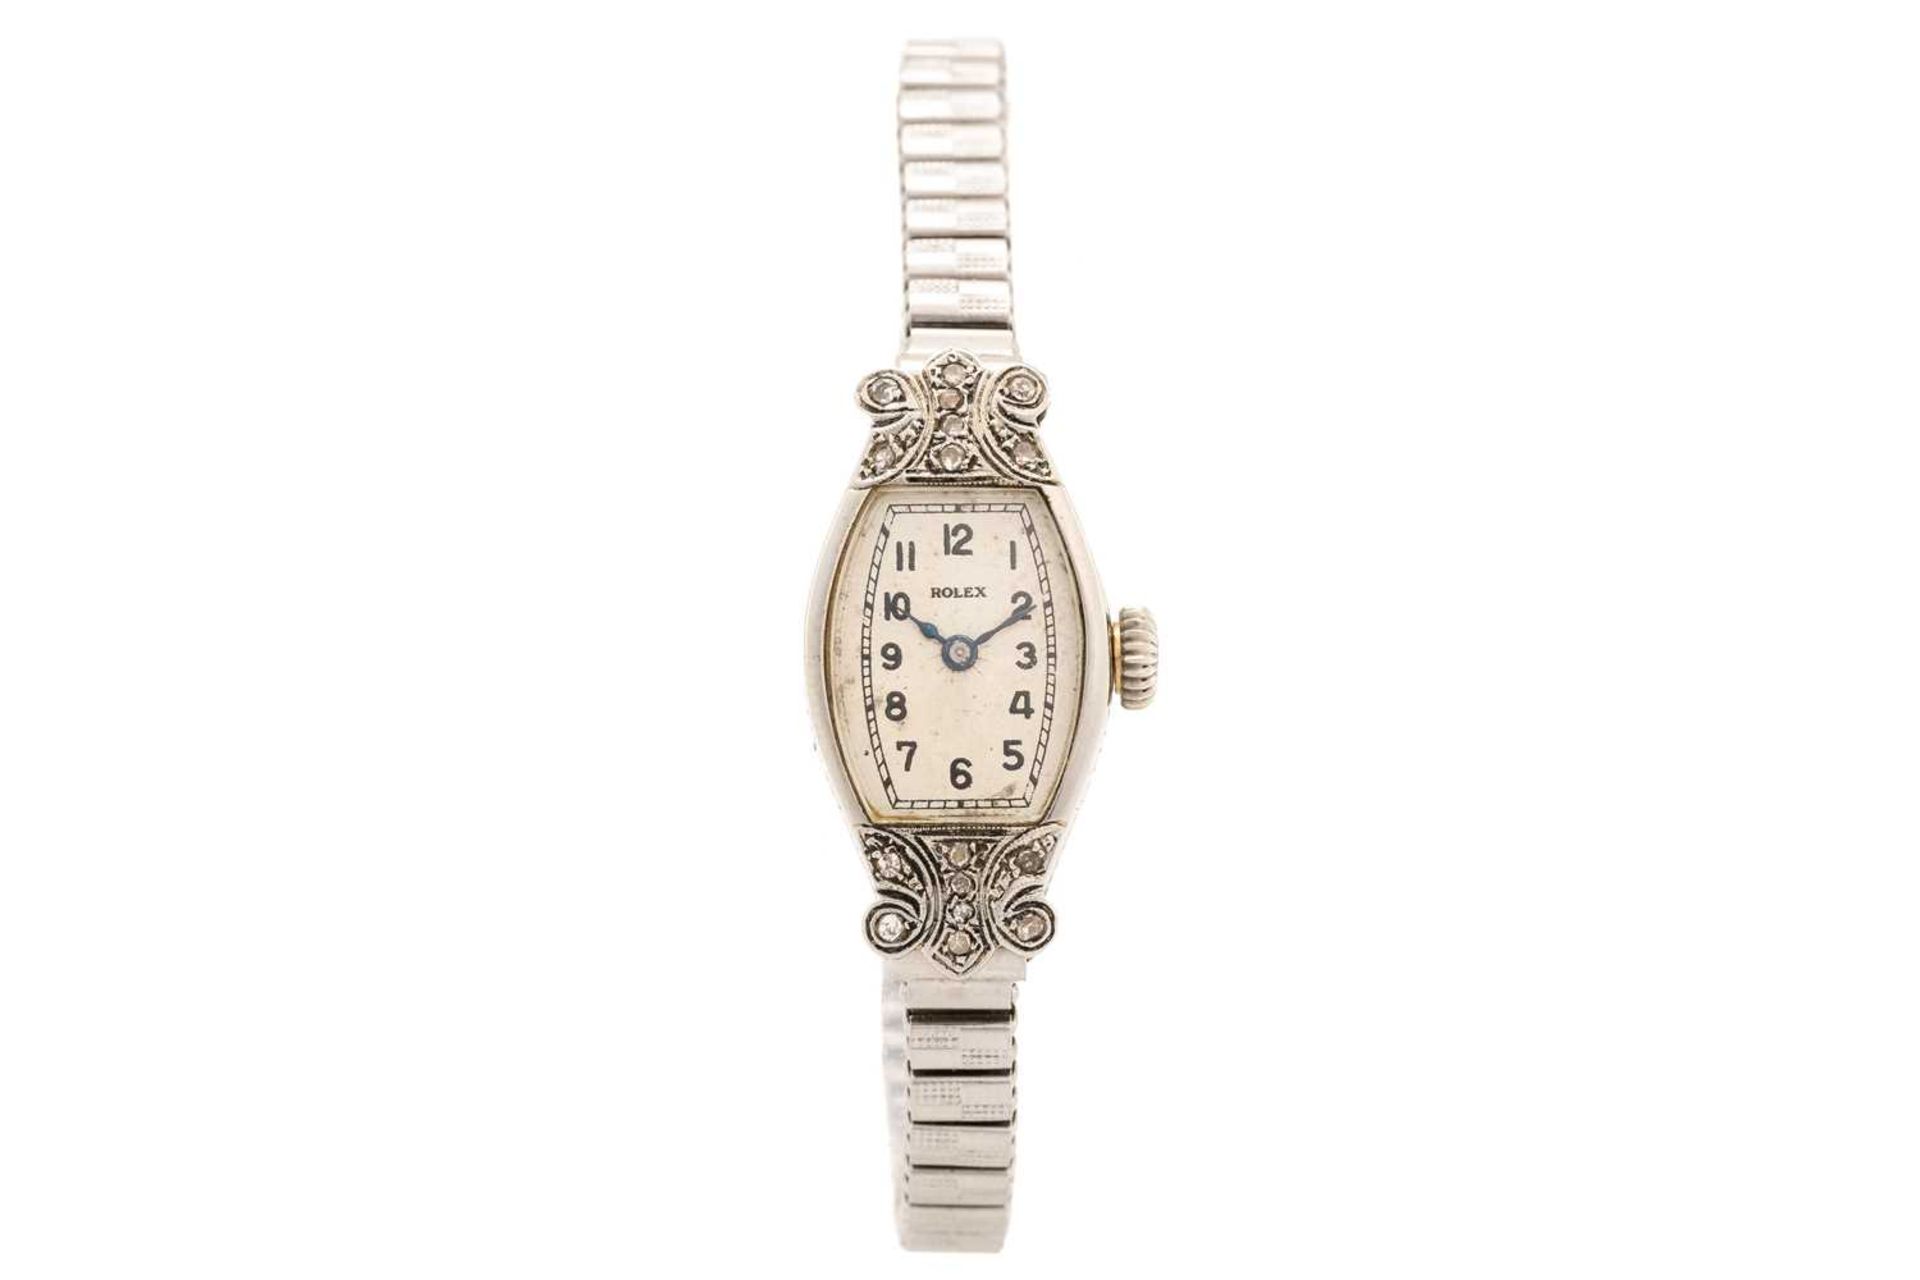 A 1937 Rolex lady's dress watch, featuring a Swiss made hand-wound movement in a white metal tonneau